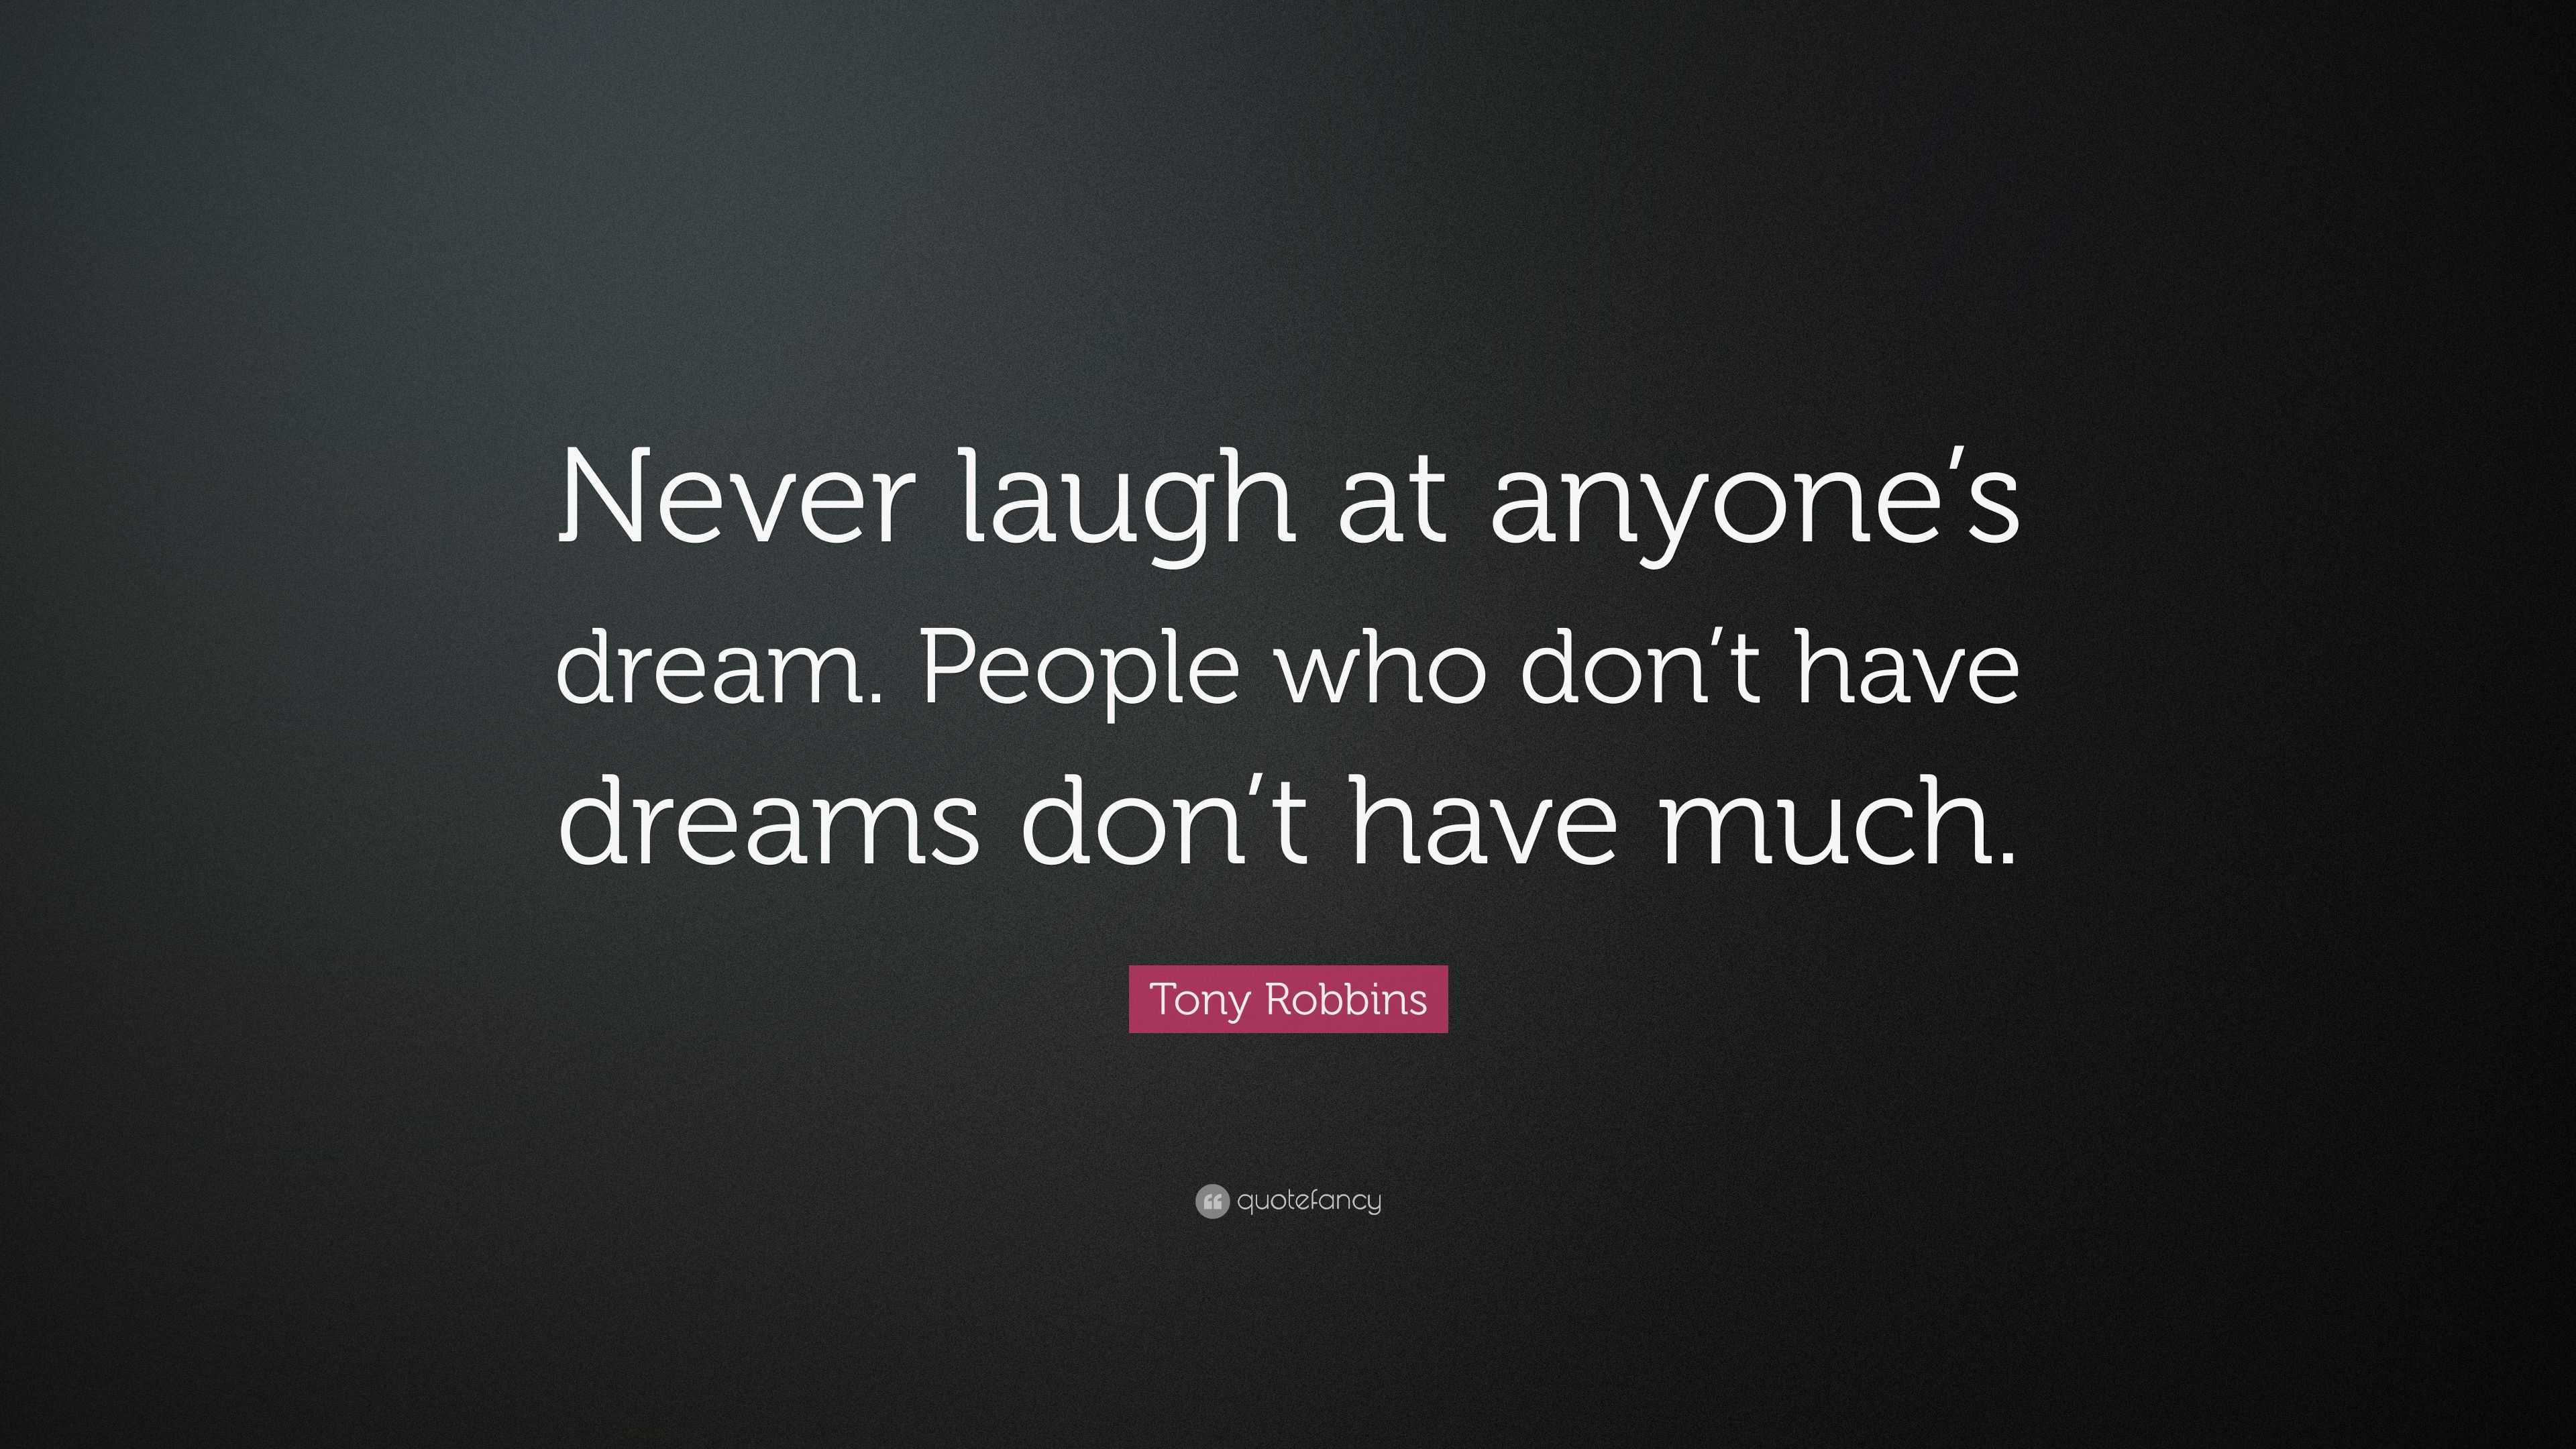 Tony Robbins Quote: “Never laugh at anyone’s dream. People who don’t ...